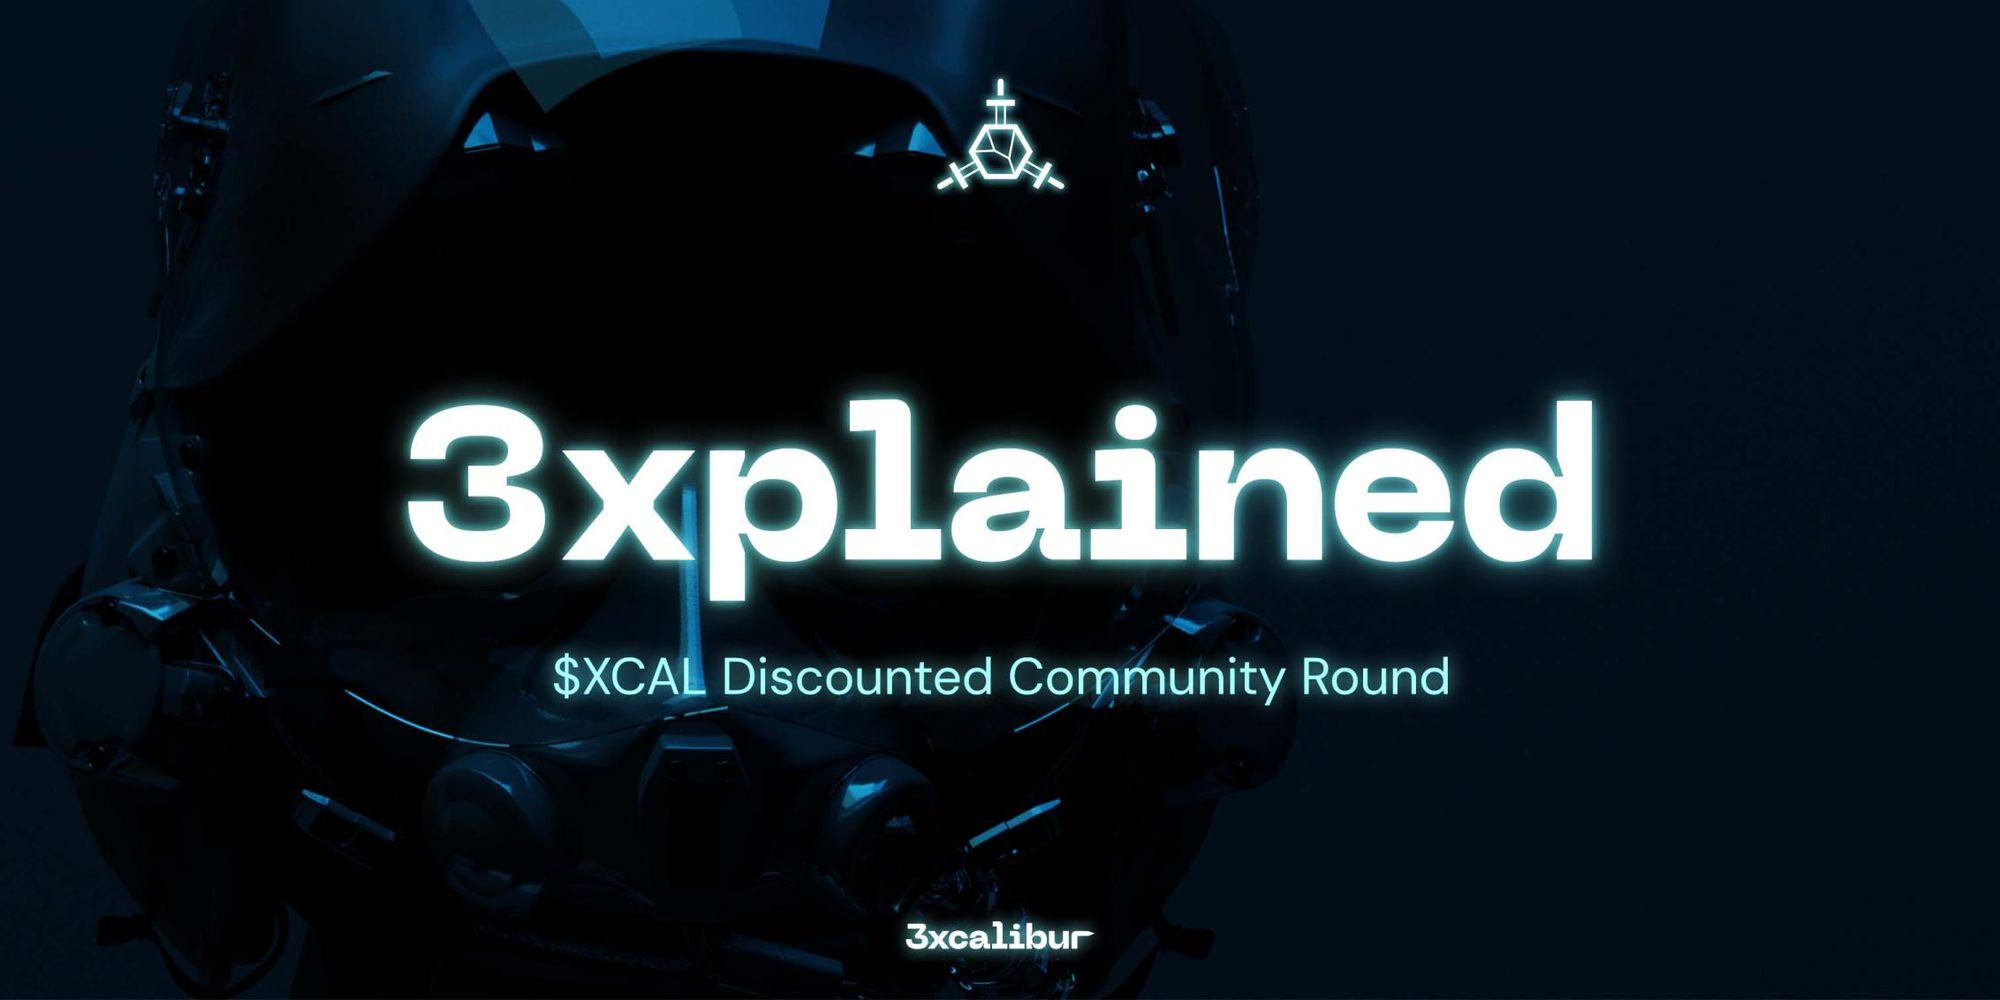 $XCAL Discounted Community Round